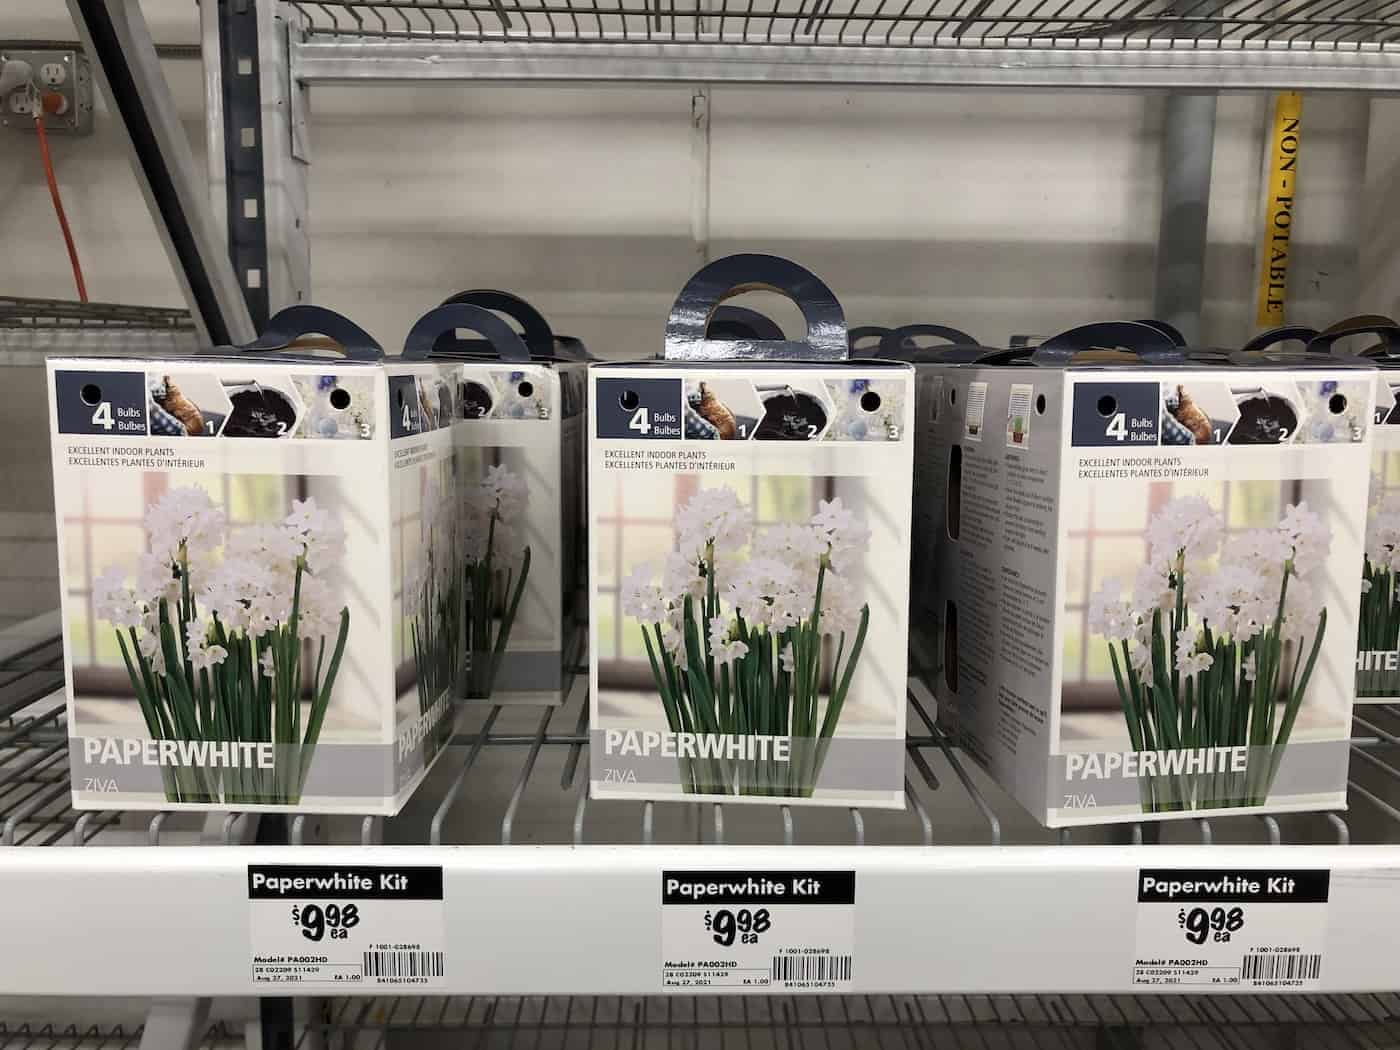 Paperwhite bulbs for sale at home depot